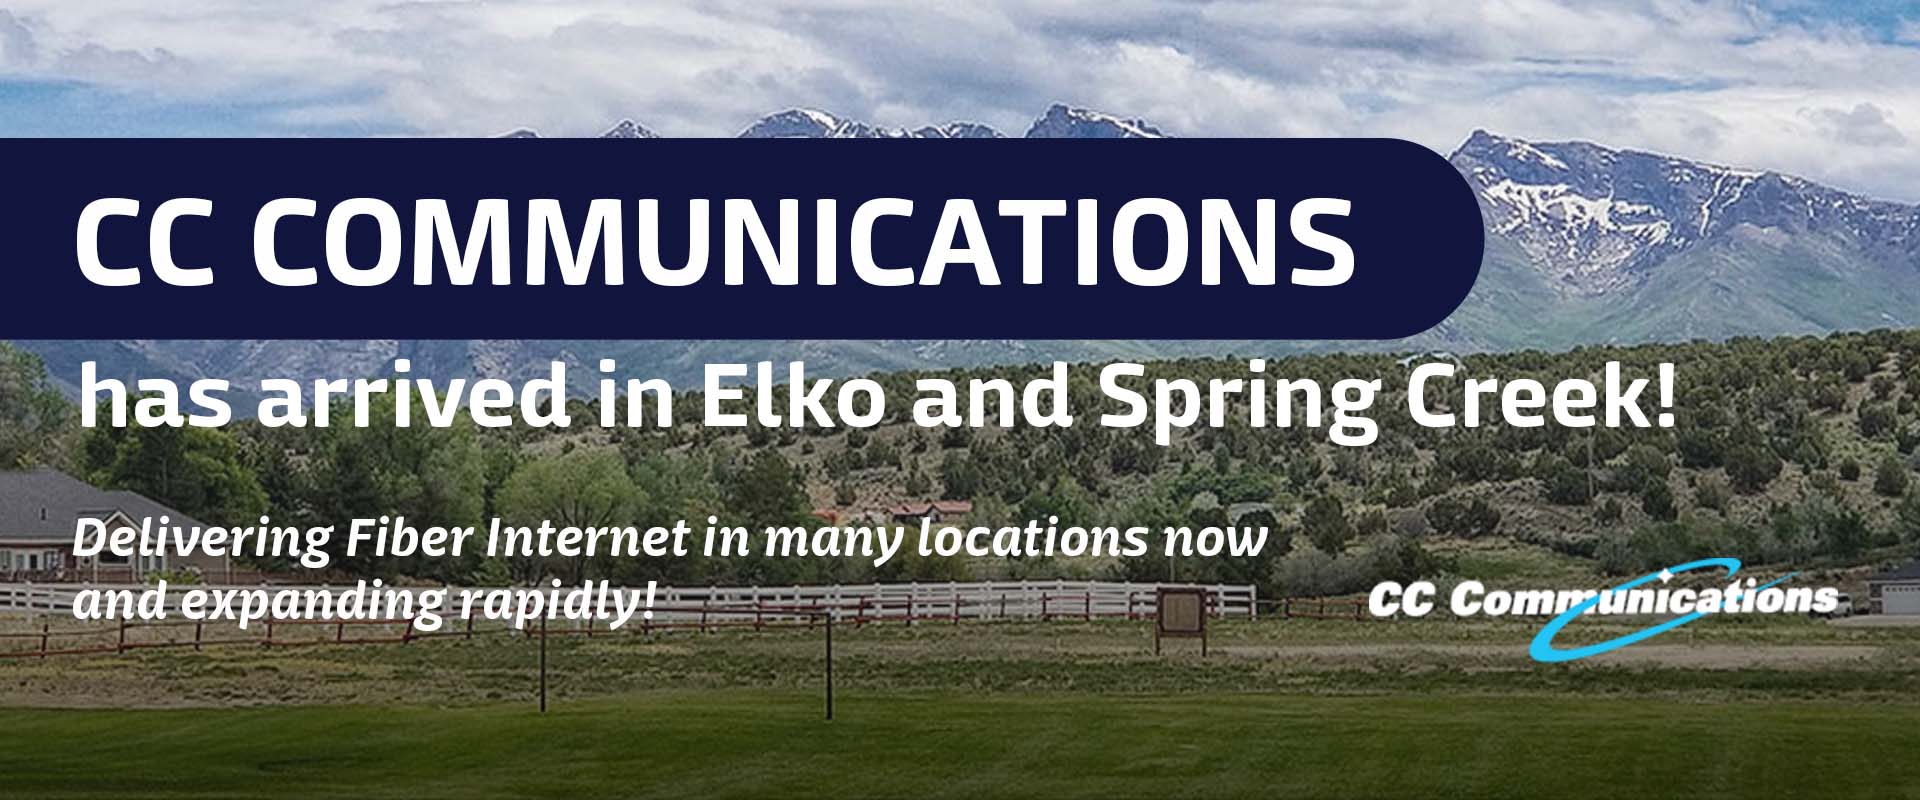 CC Communications has arrived in Elko and Spring Creek!